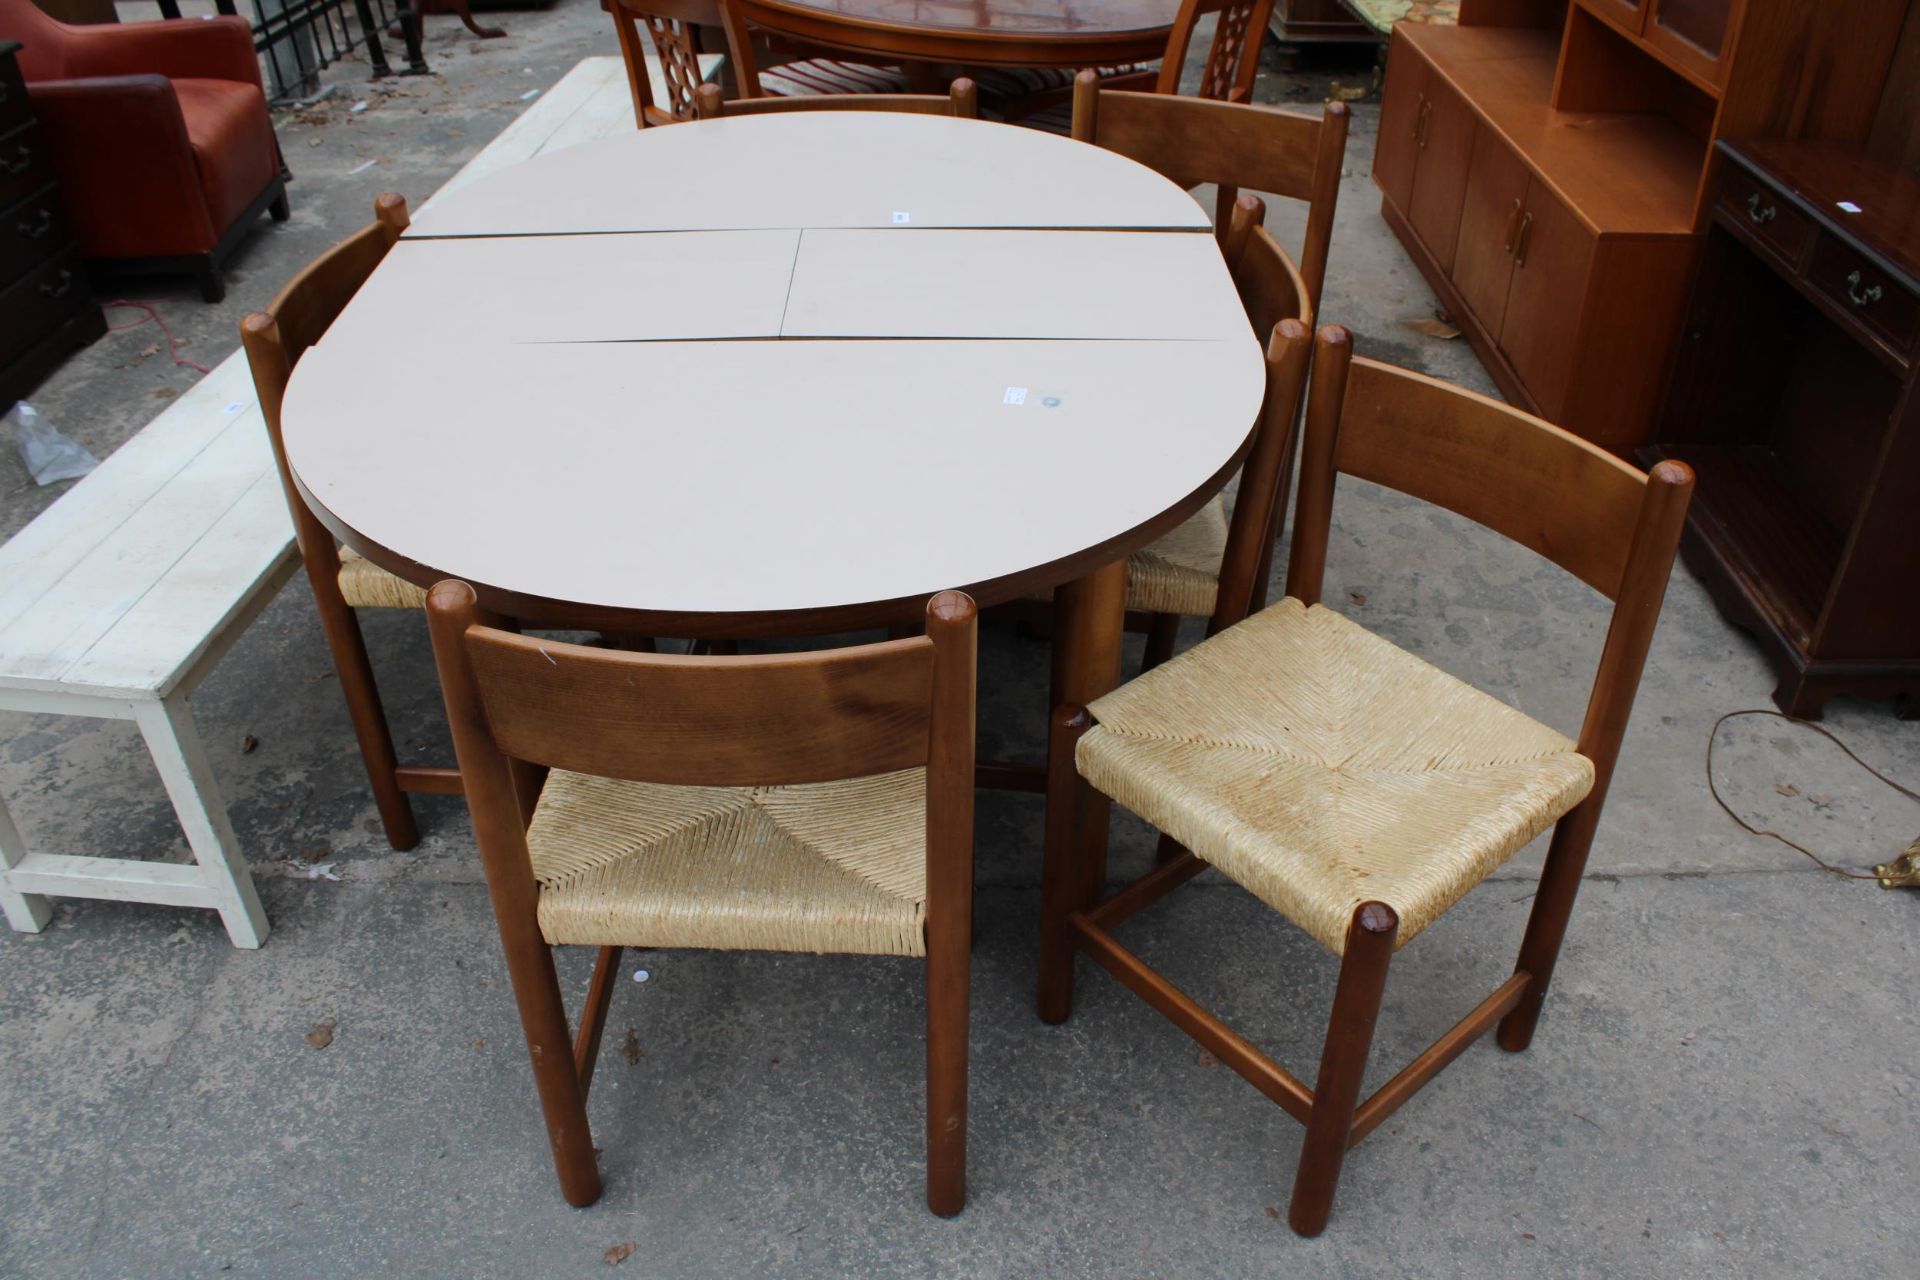 A CHARLOTTE PERRIAND STYLE DINING TABLE 43" DIAMETER (LEAF14") AND SIX MERIBEL STYLE DINING CHAIRS - Image 2 of 3